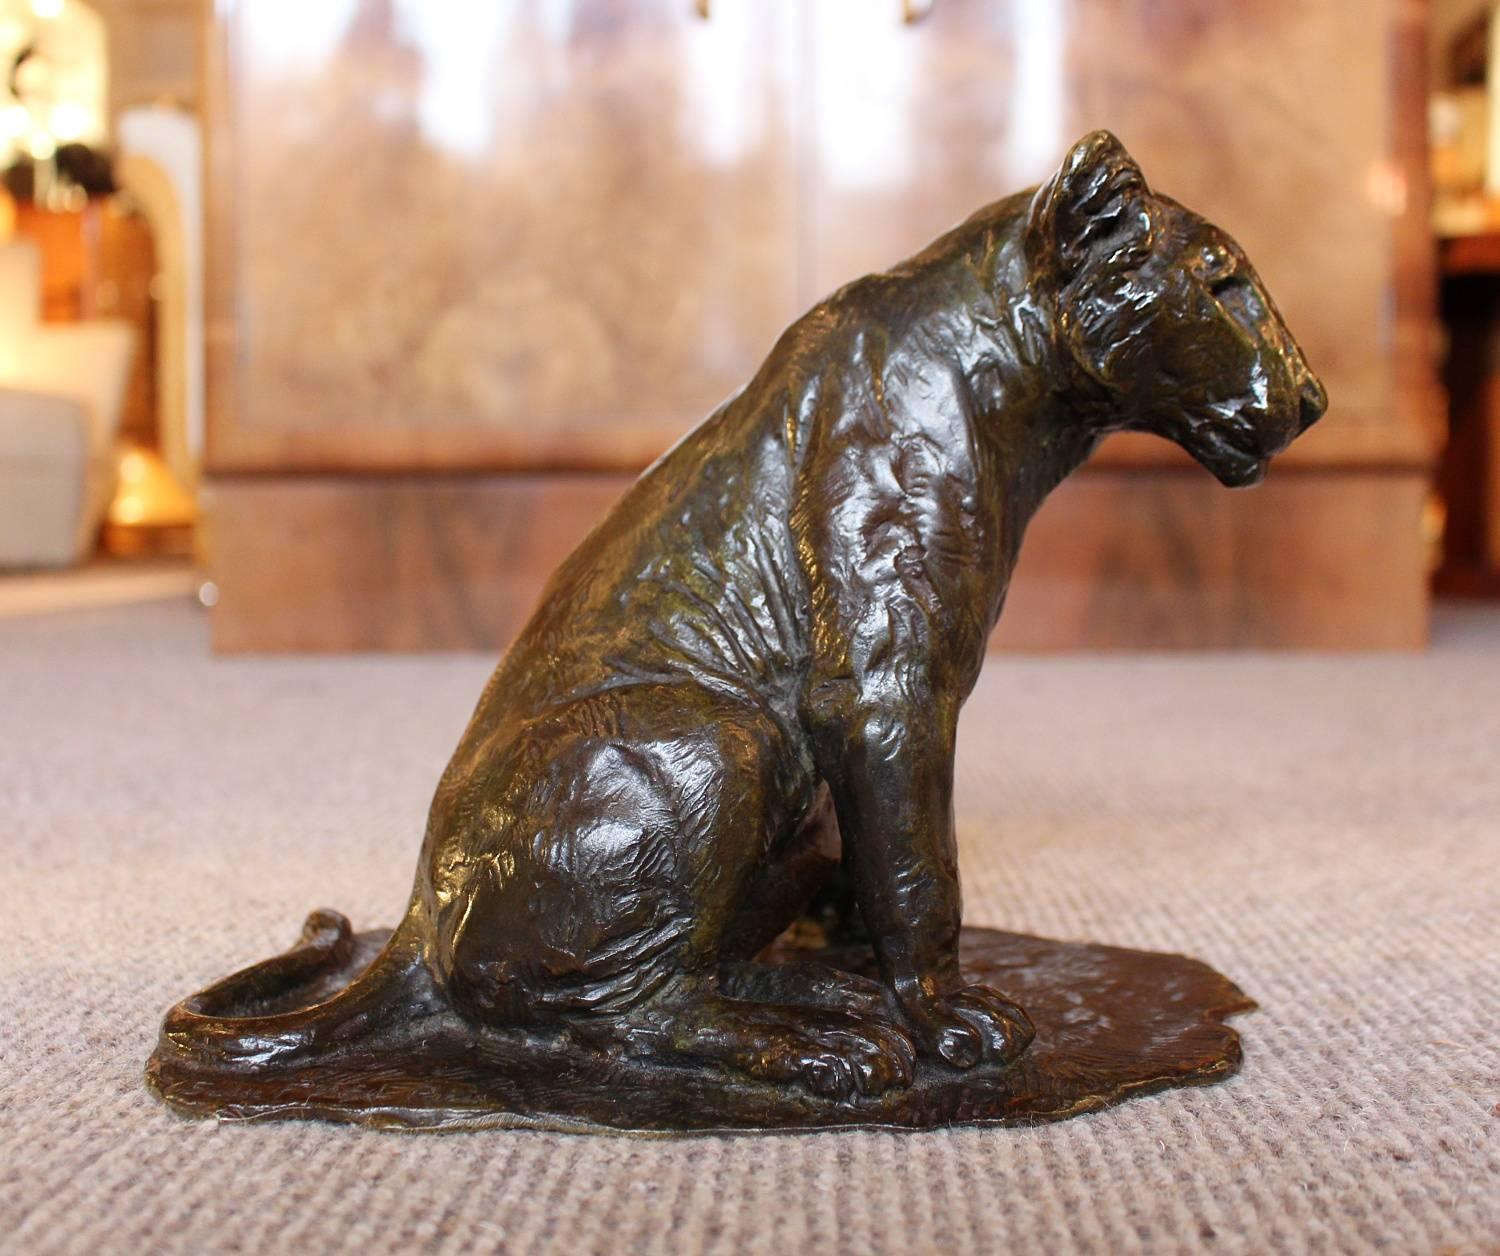 Lionceau Assis, by Roger Godchaux (1878-1958). A patinated bronze study of seated lion cub set over an integral, naturalistic base. Cast with fire perdue method by Susses Frères Editeurs Paris.

Signed Roger Godchaux to bronze.
  